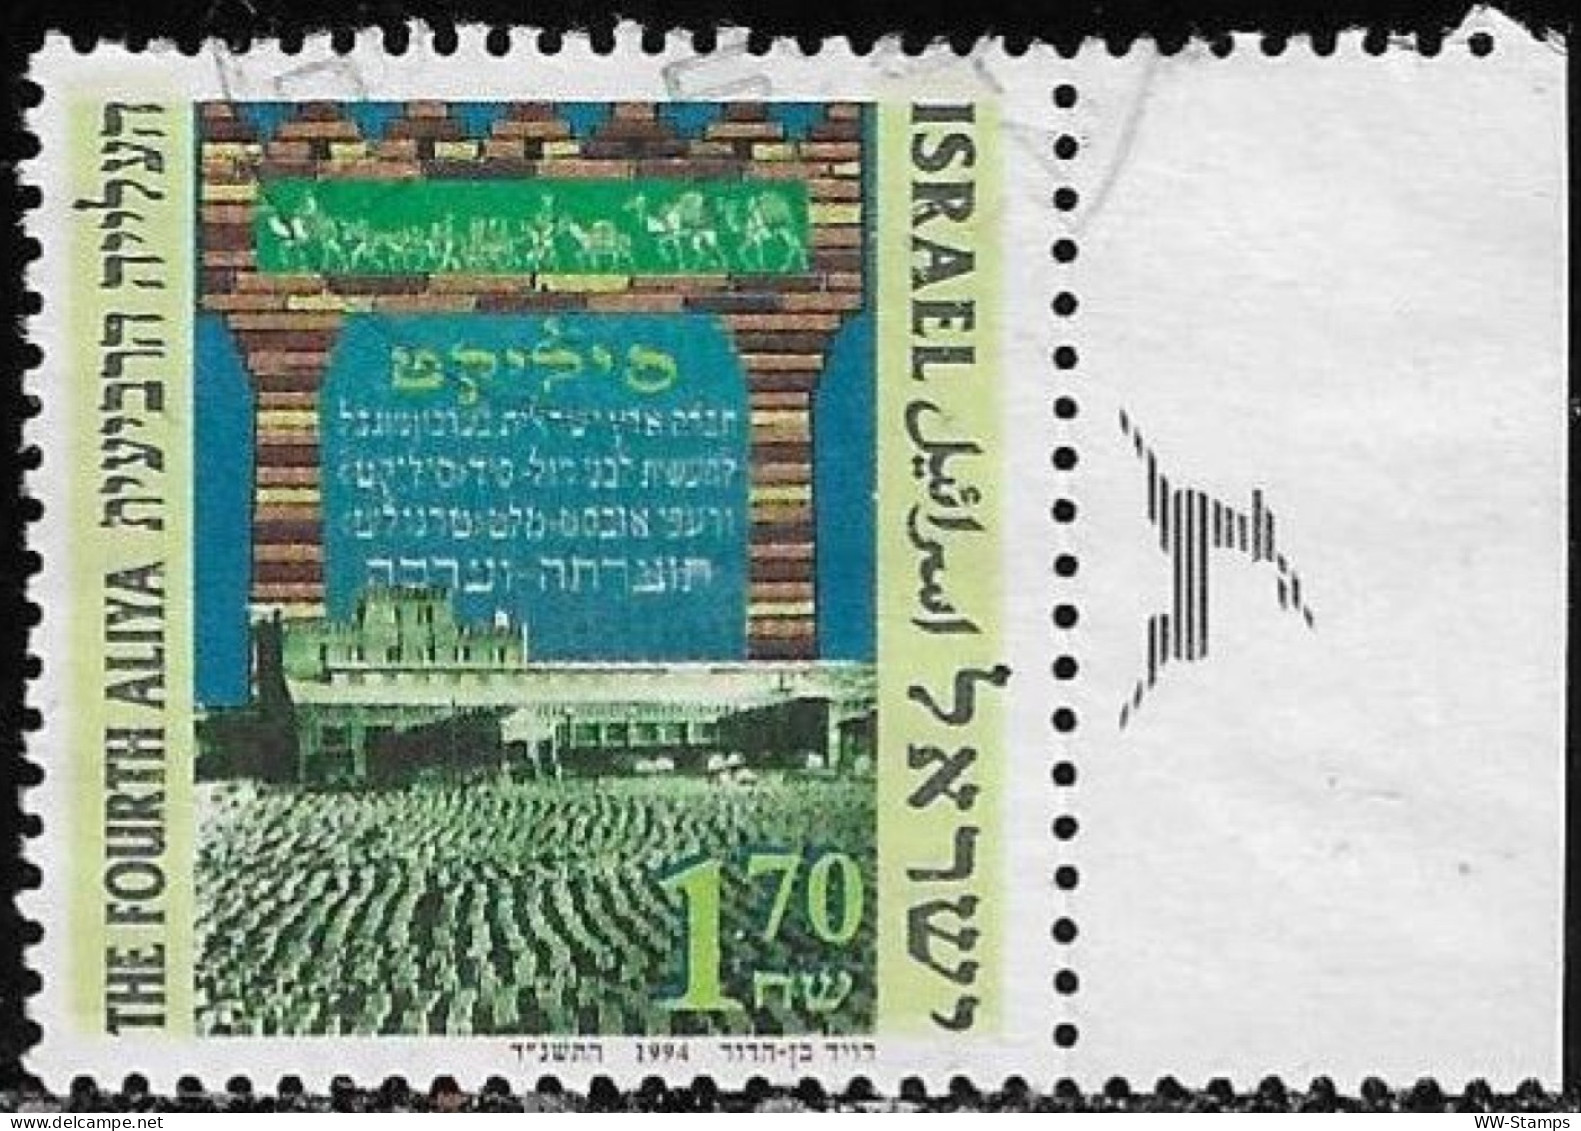 Israel 1994 Used Stamp The Fourth Aliya Immigration Of Jews To Israel [INLT46] - Oblitérés (sans Tabs)